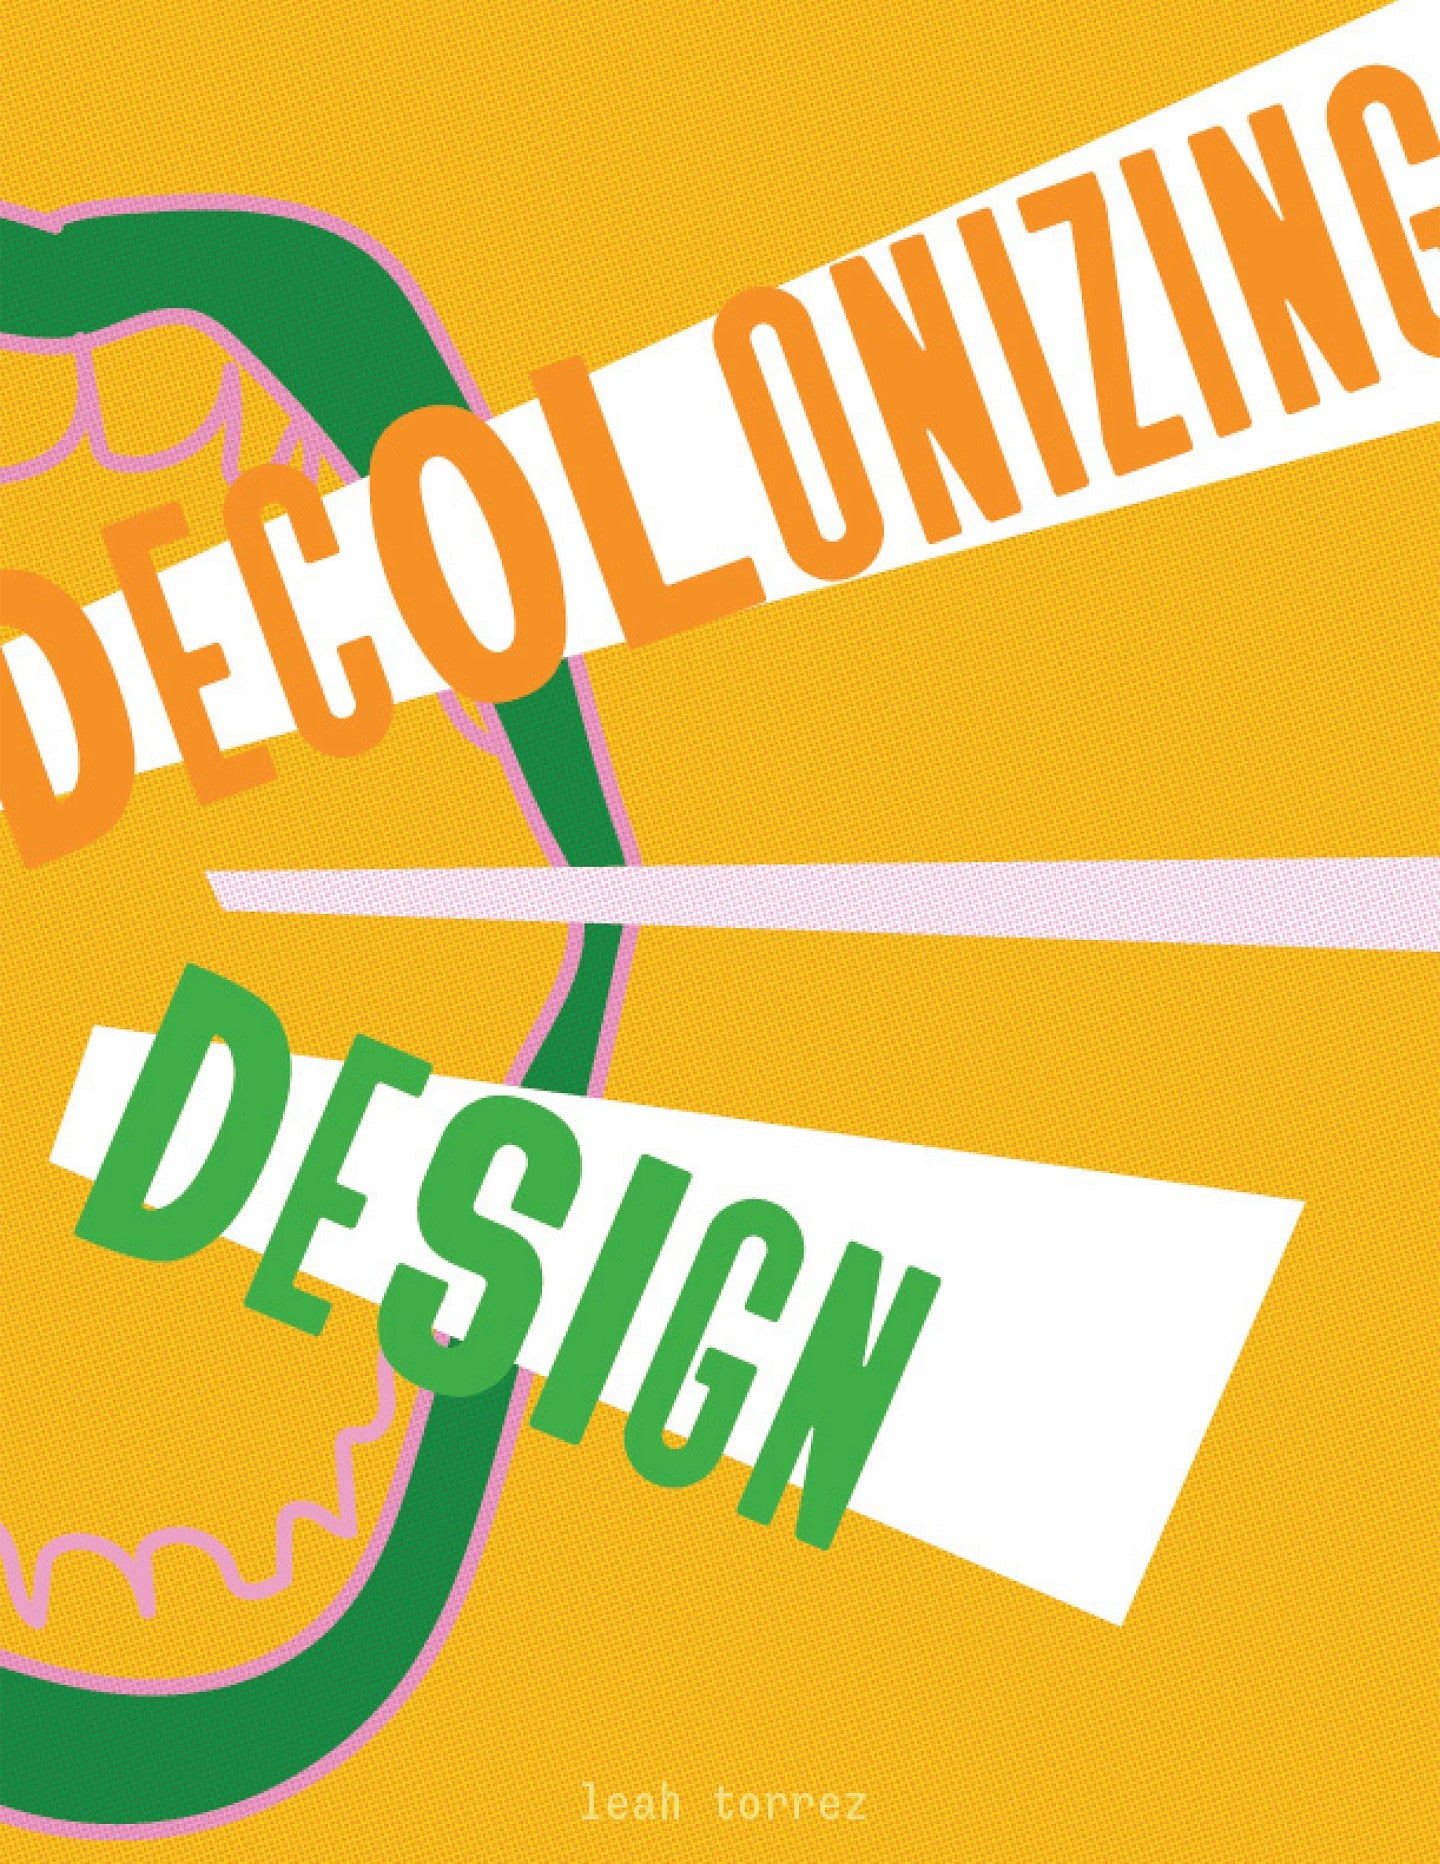 graphic design showing a green mouth shouting the words Decolonizing Design on an orange background